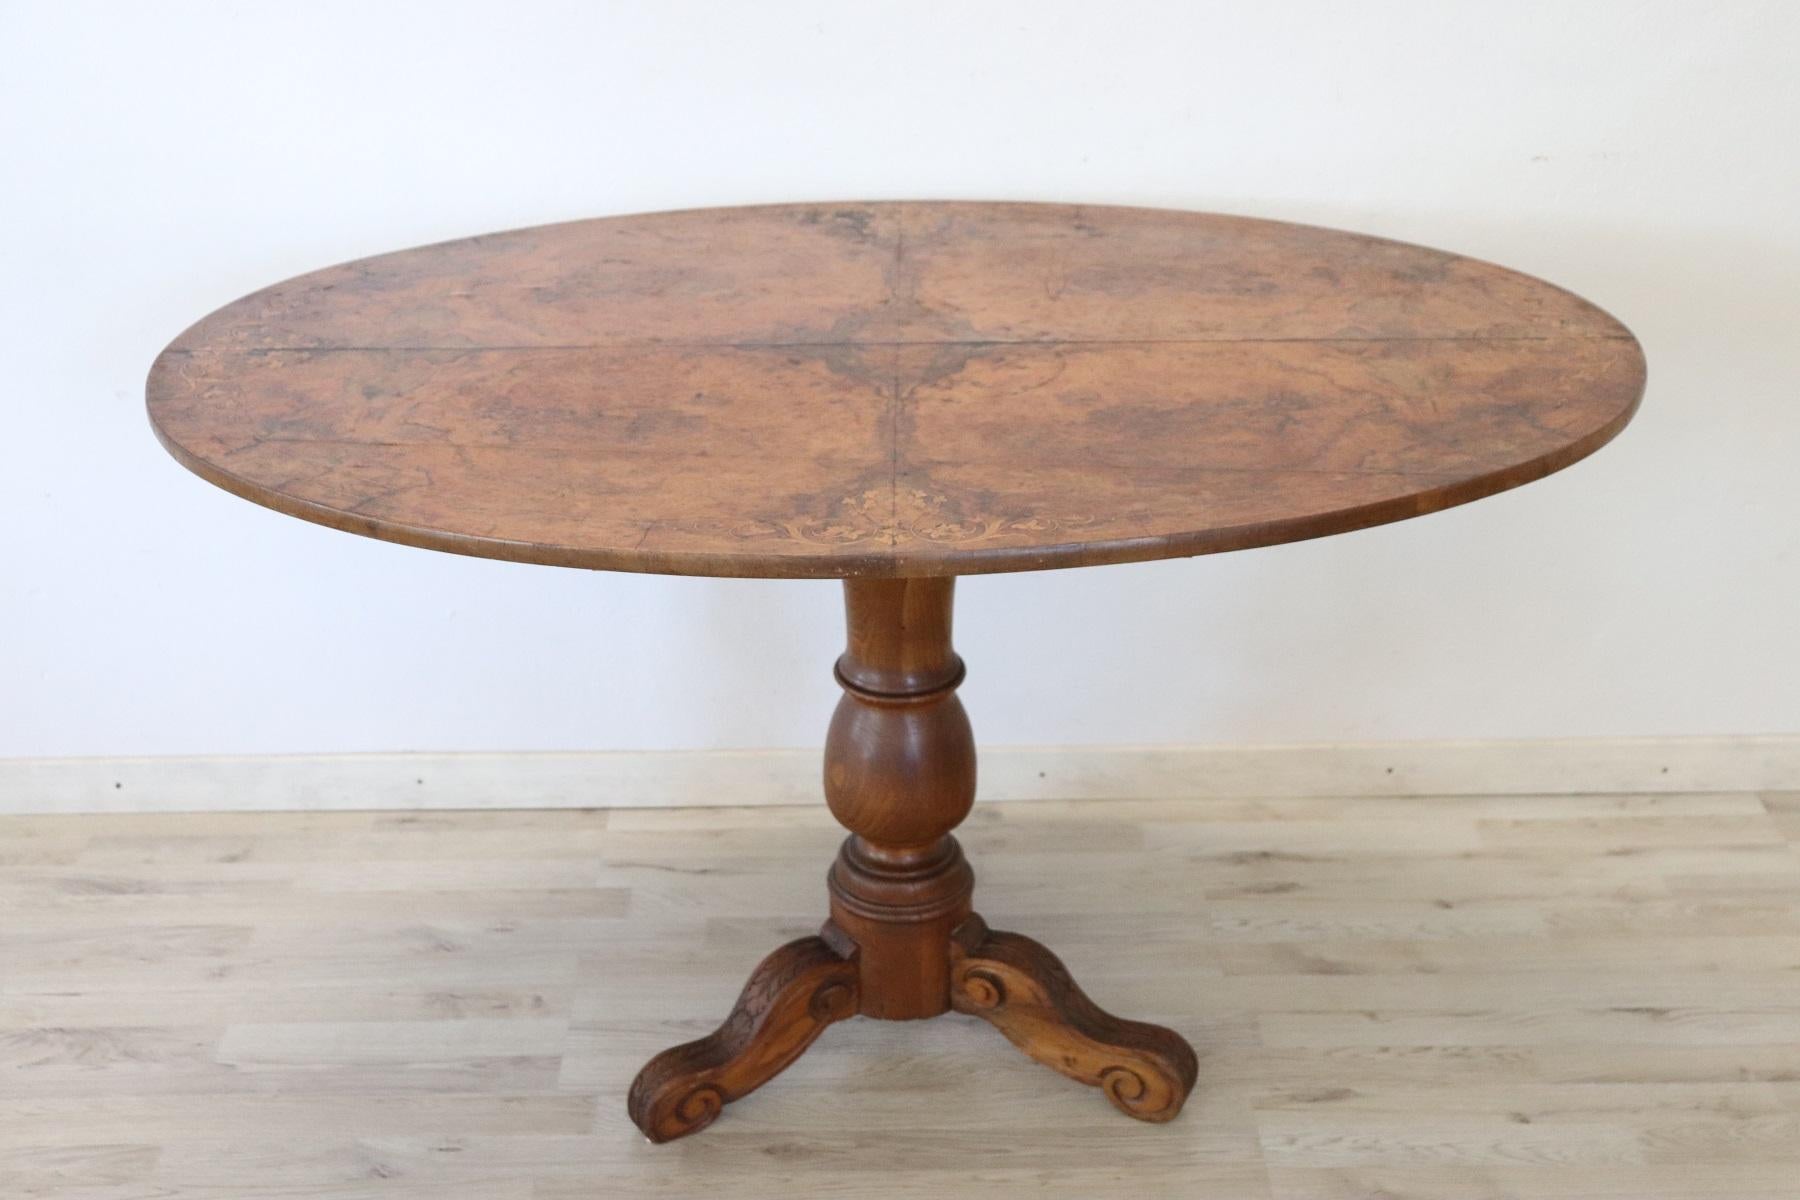 Beautiful important antique oval table, 1850s in walnut. The plan presents precious work of inlay and briar root. The inlaid decoration is of floral taste made with small pieces of different and precious woods. Please look at all the images to